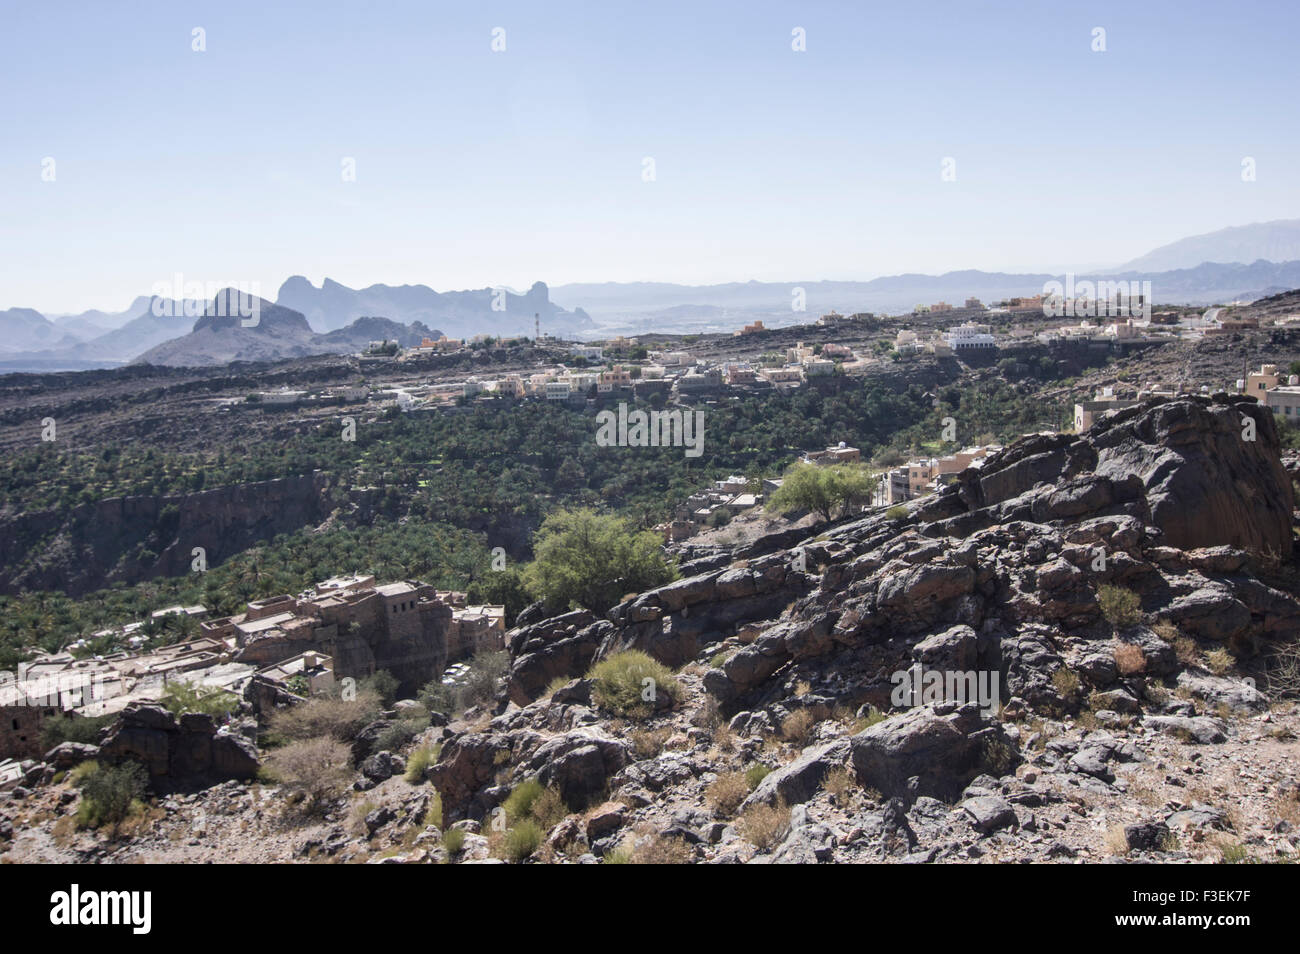 View over canyons in the oasis village of Misfat al Abriyeen in the Sultanate of Oman, Stock Photo